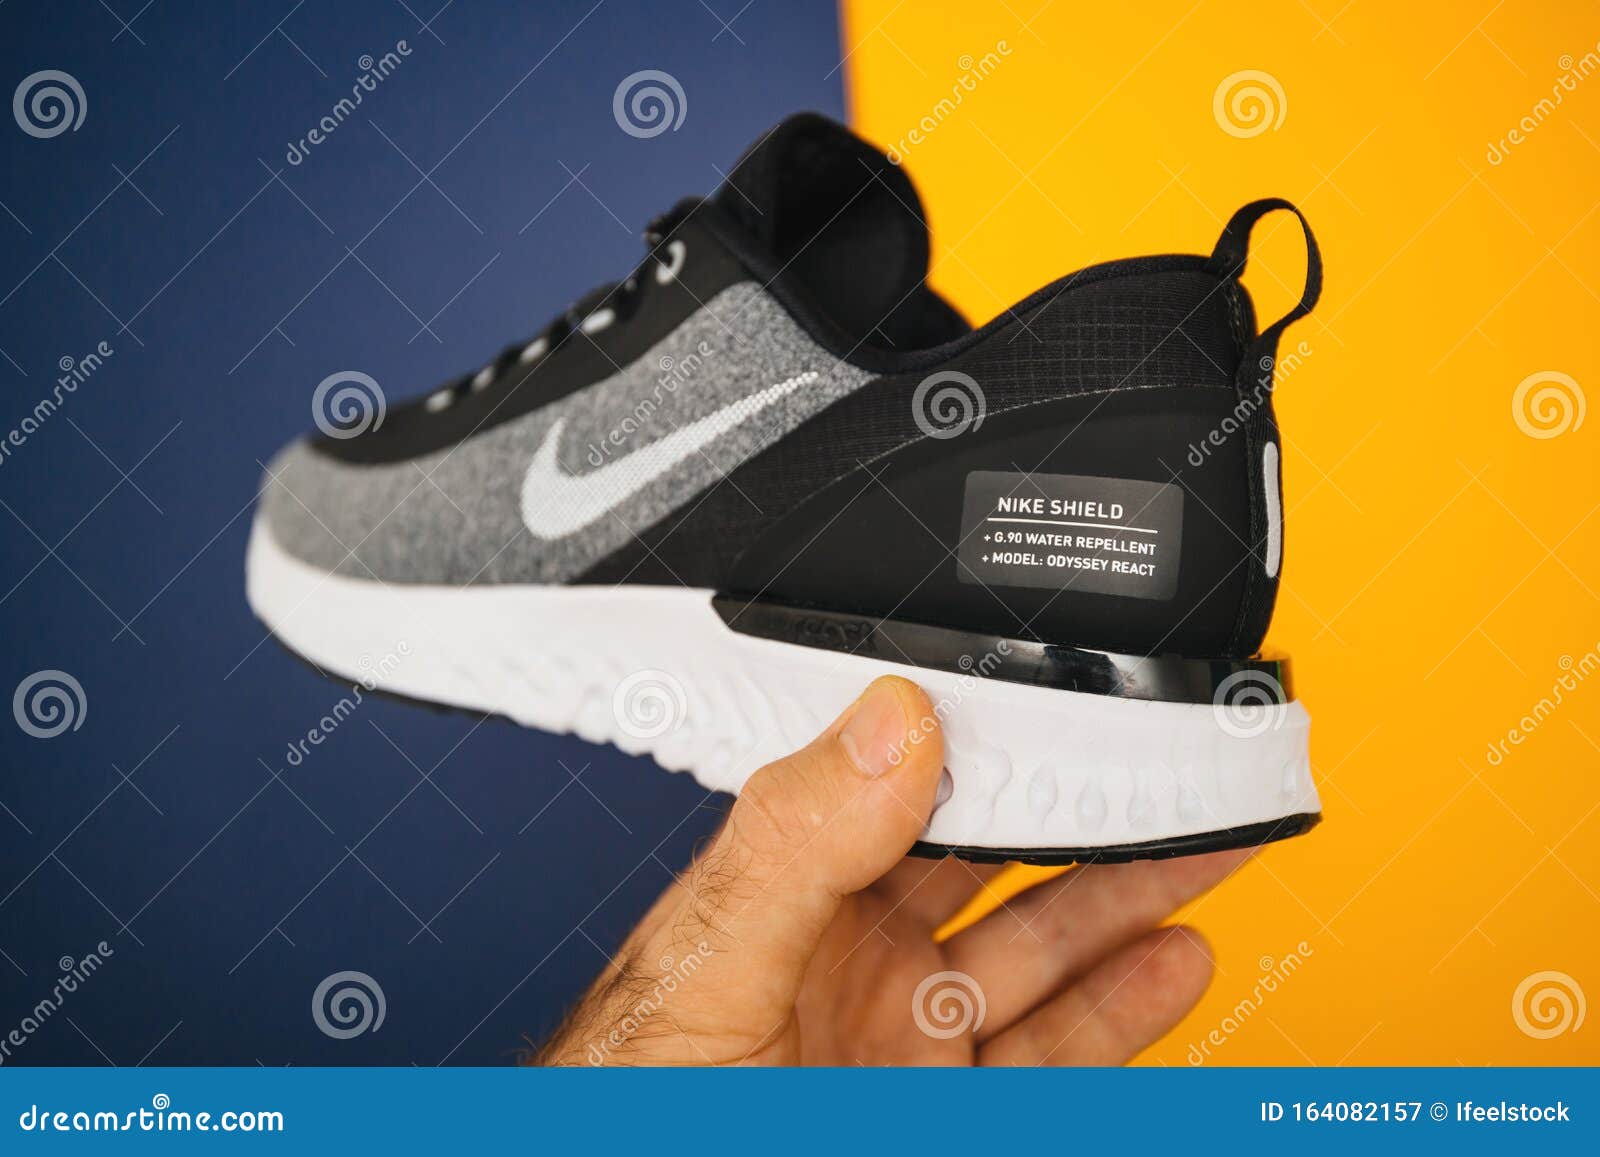 and Windproof Running Shoe Nike Odyssey React in Hand Editorial Photography - Image of footwear, view: